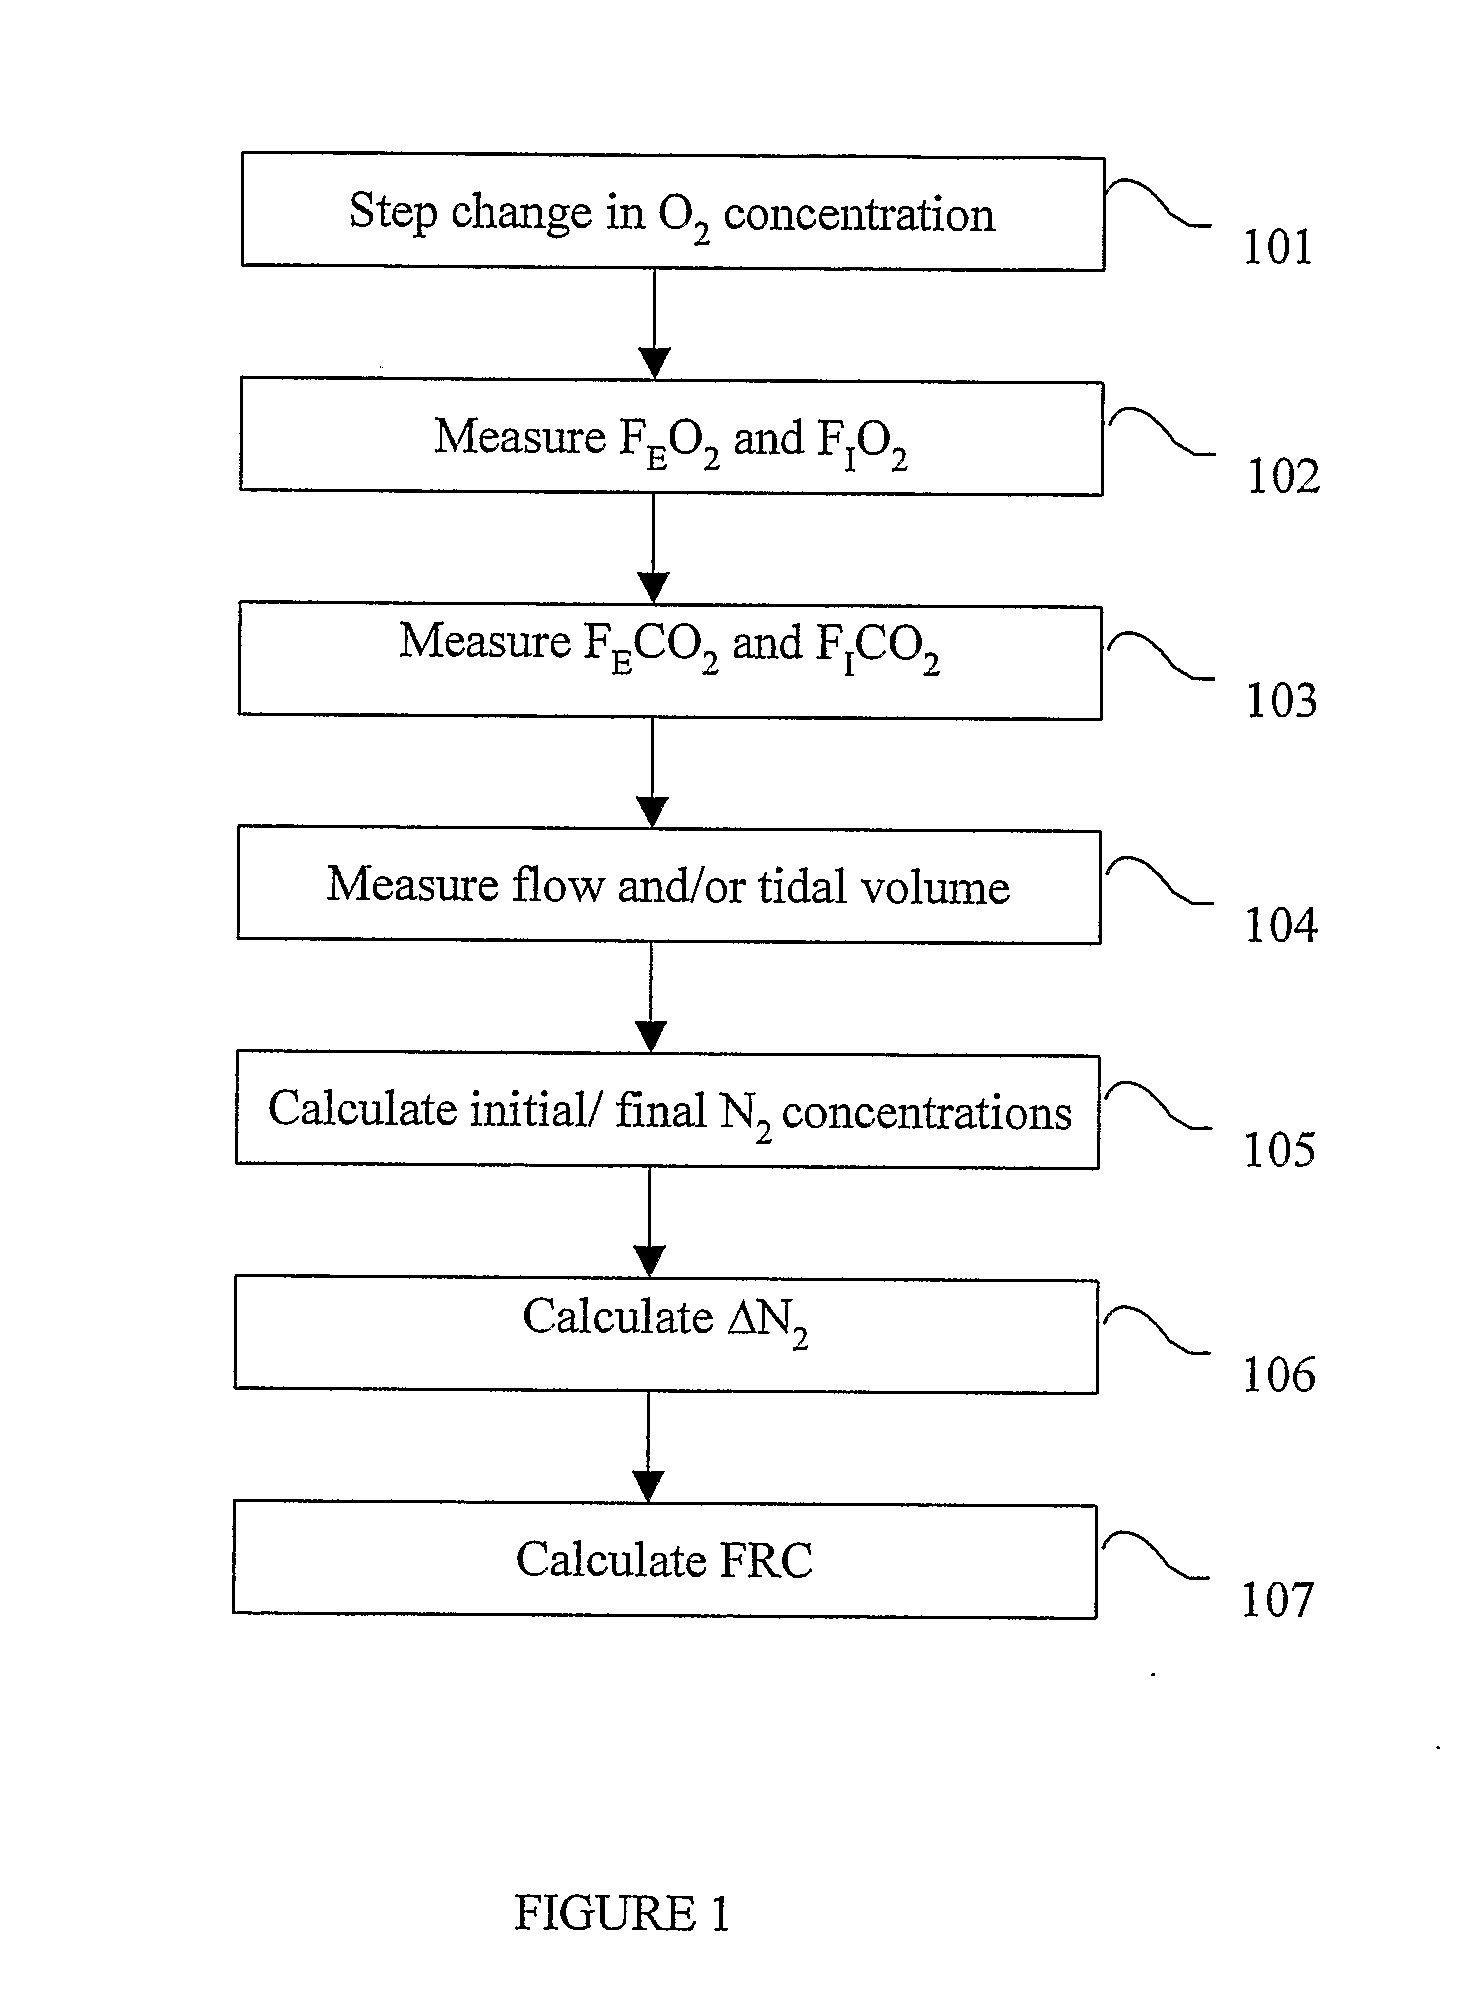 Lung volume monitoring method and device